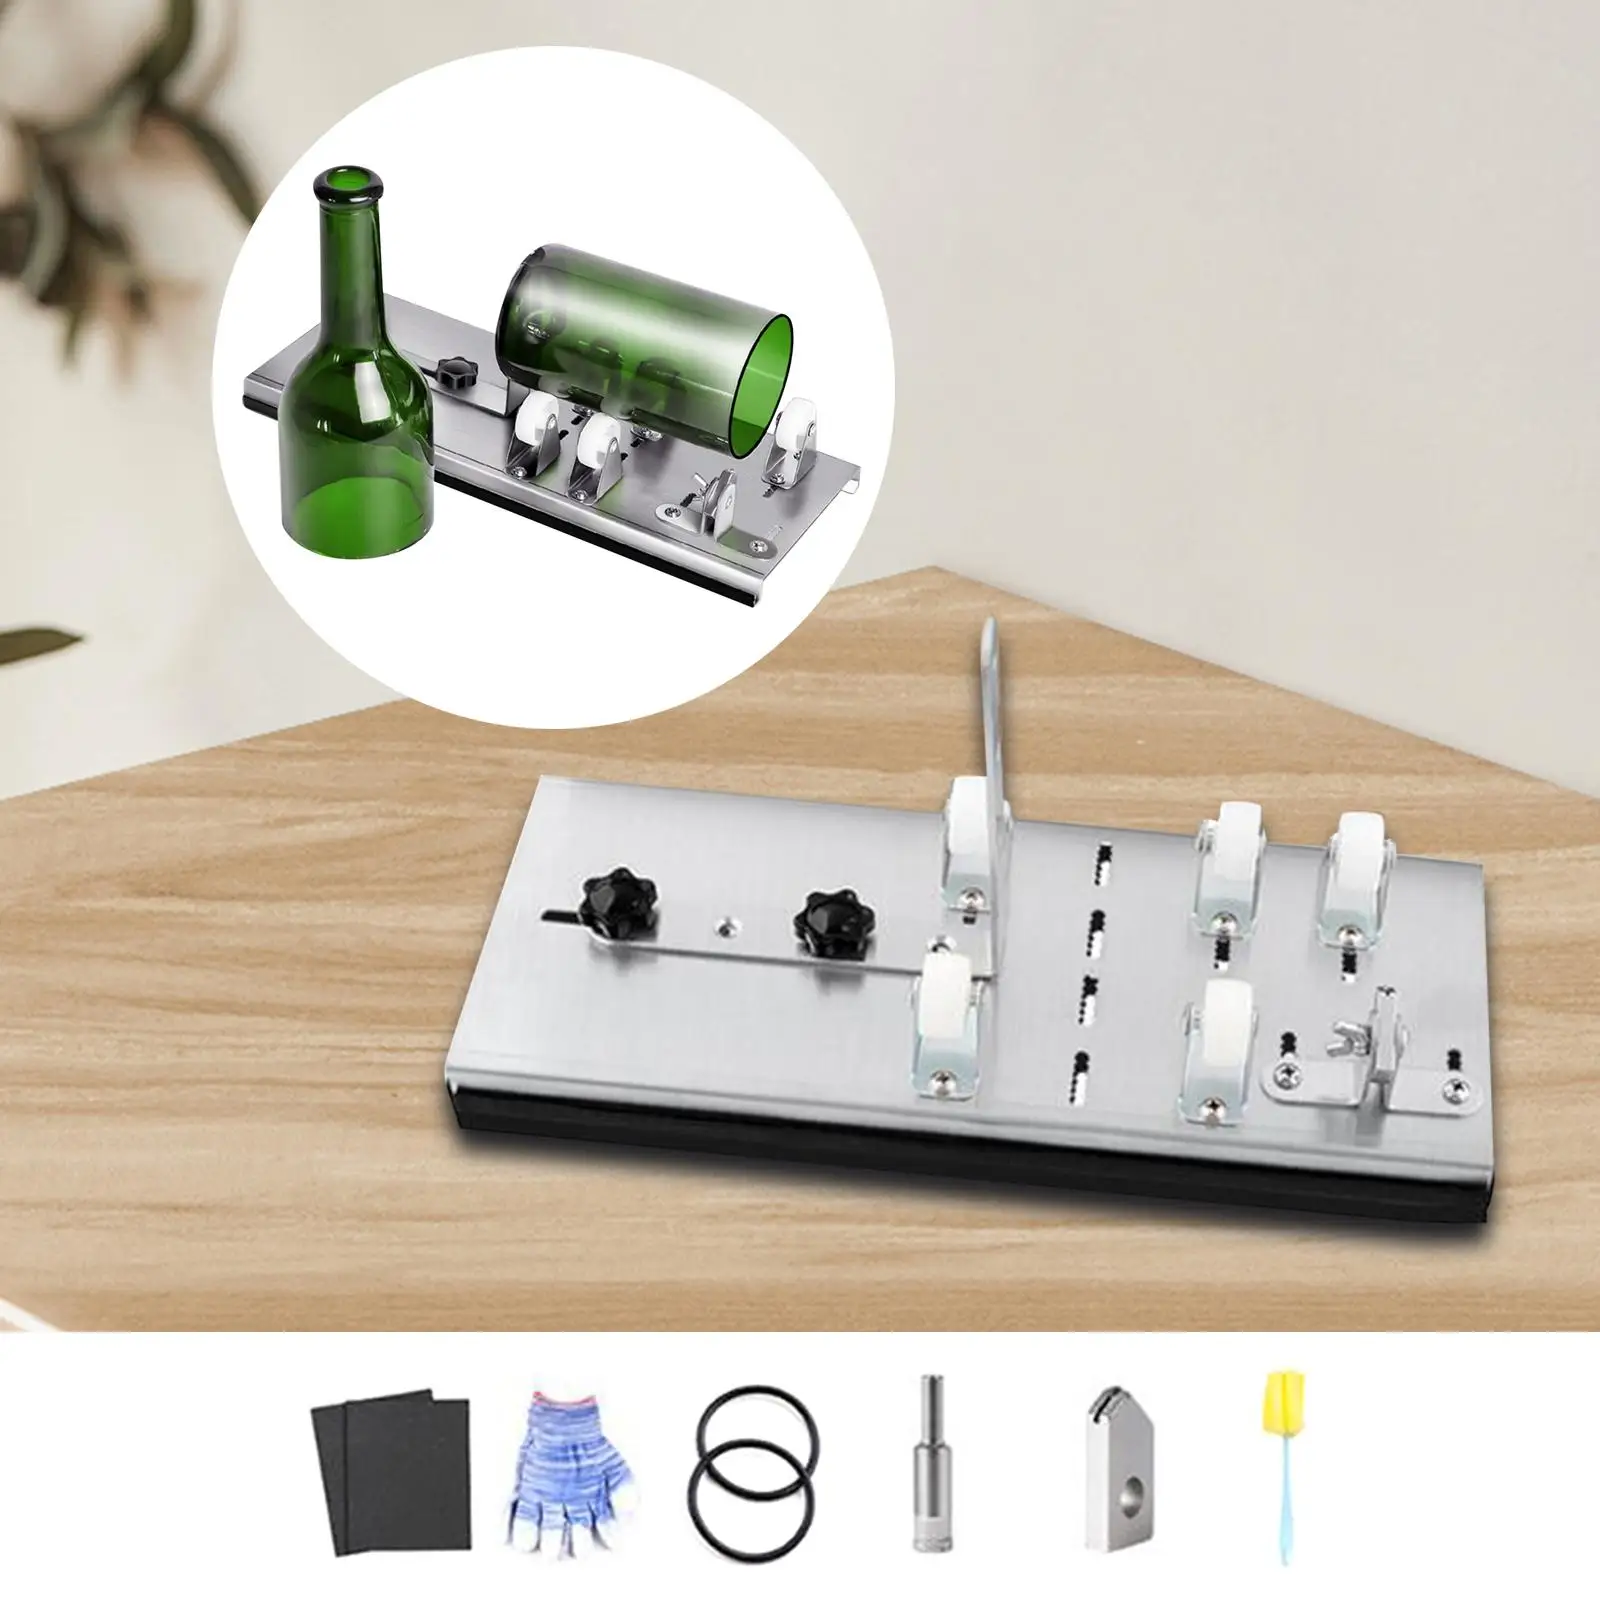 Glass Bottle Cutter Manual Tool Stainless Steel Household Stable Handicrafts for